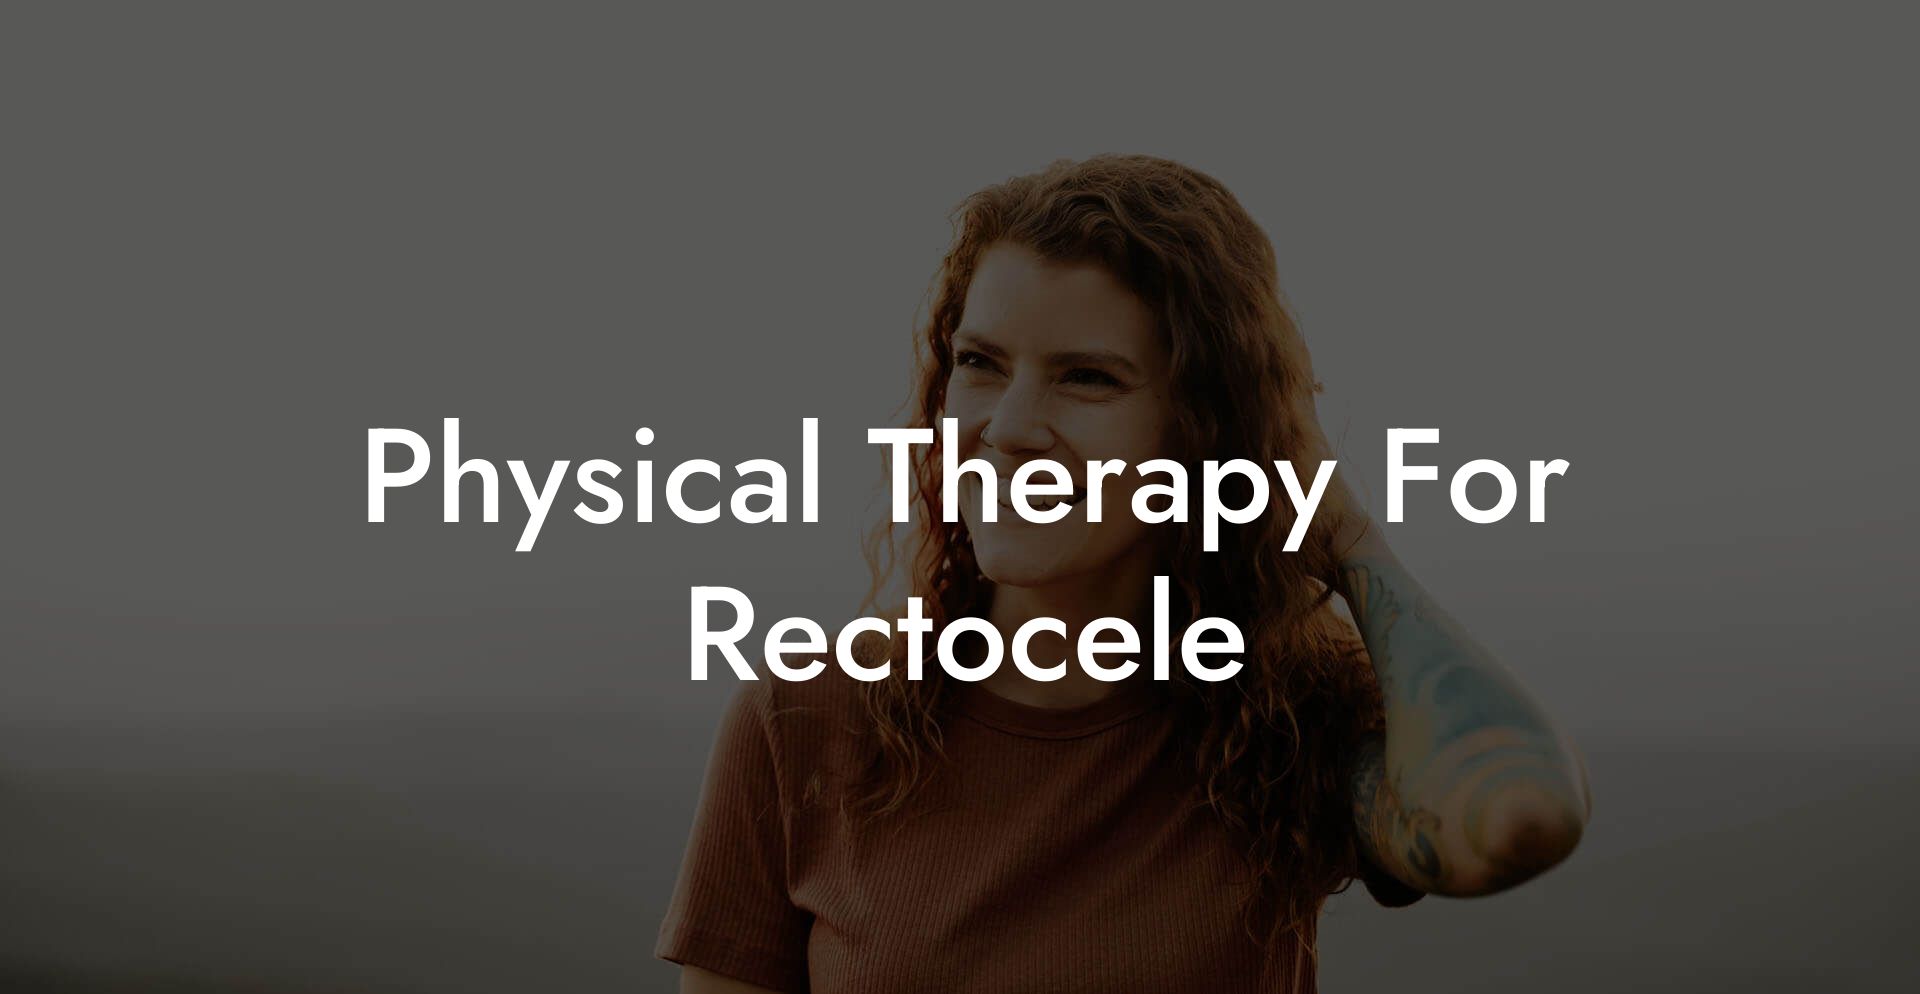 Physical Therapy For Rectocele